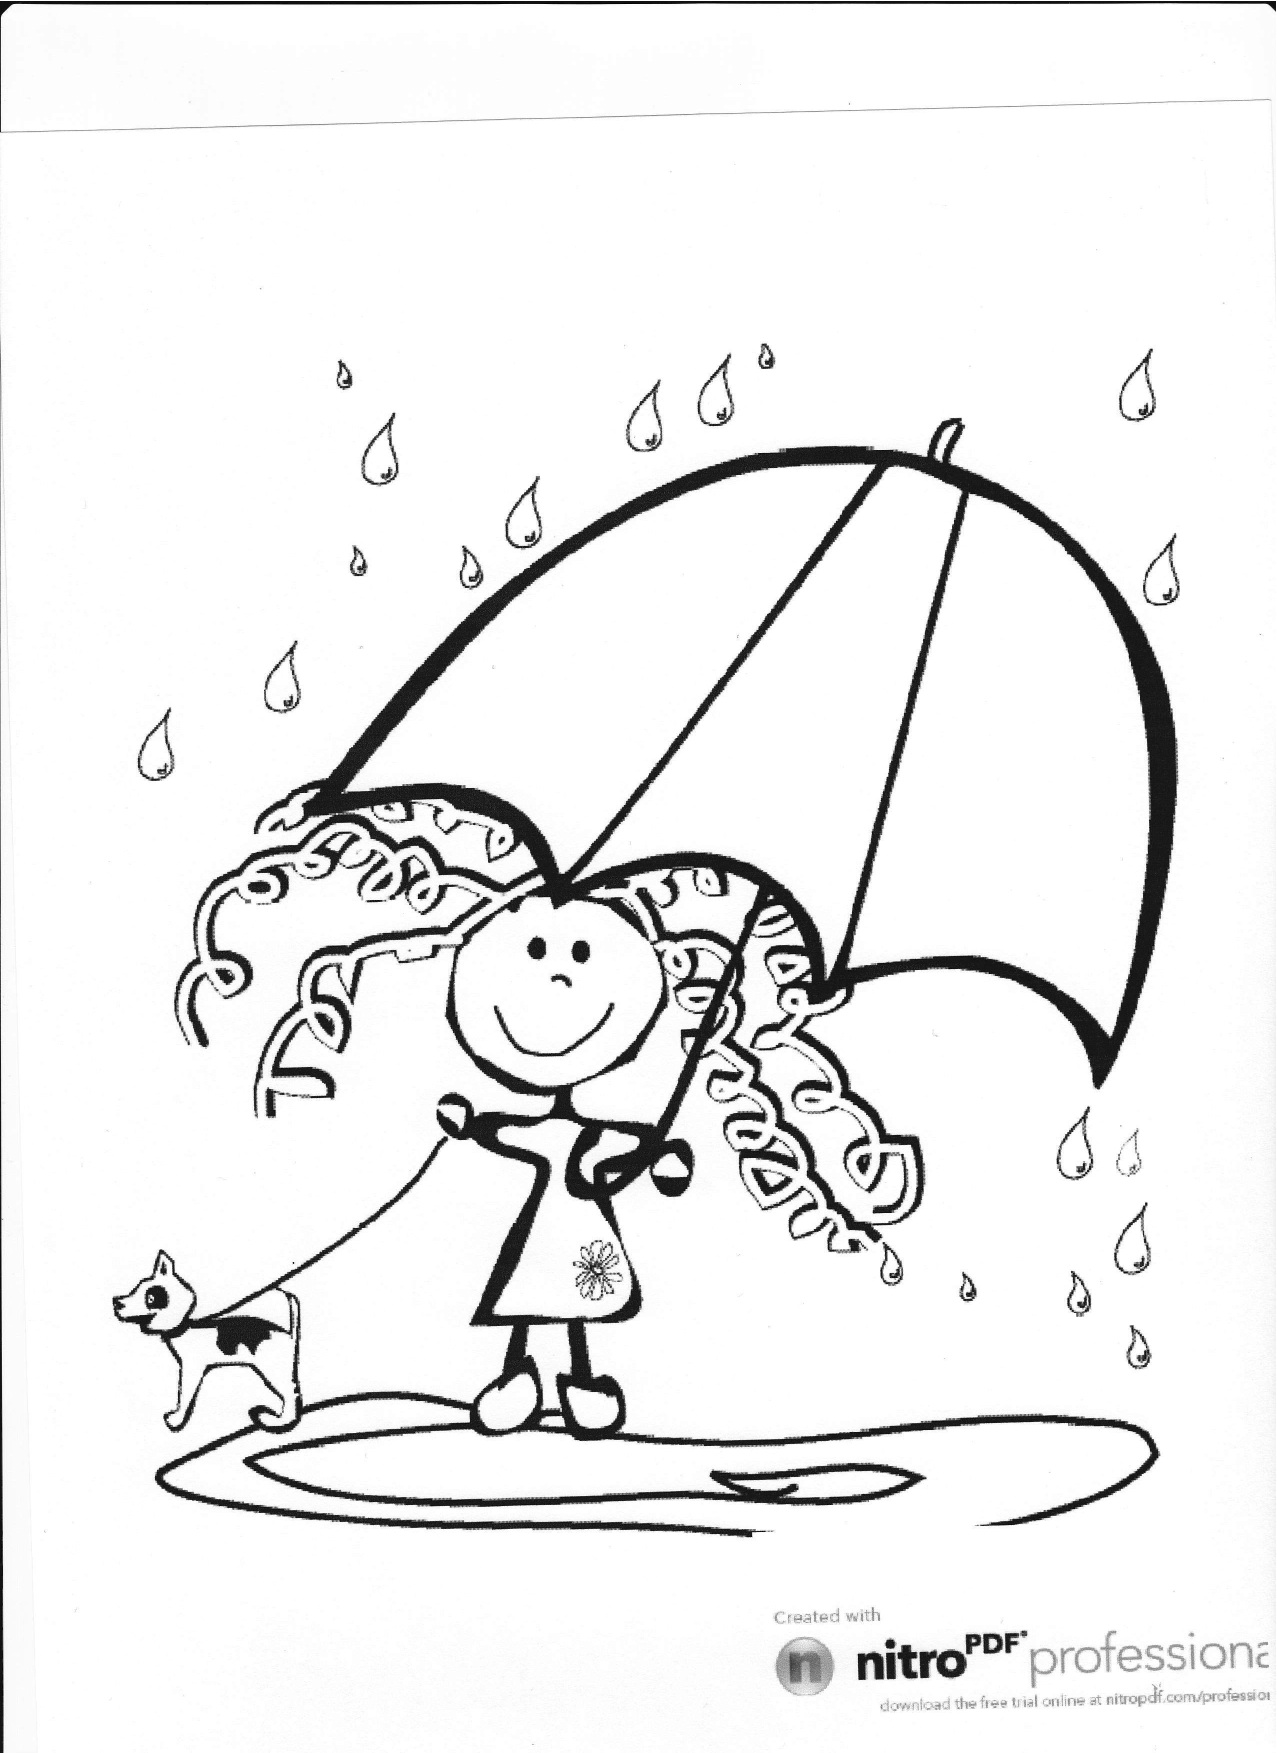 Rainy day coloring pages to download and print for free